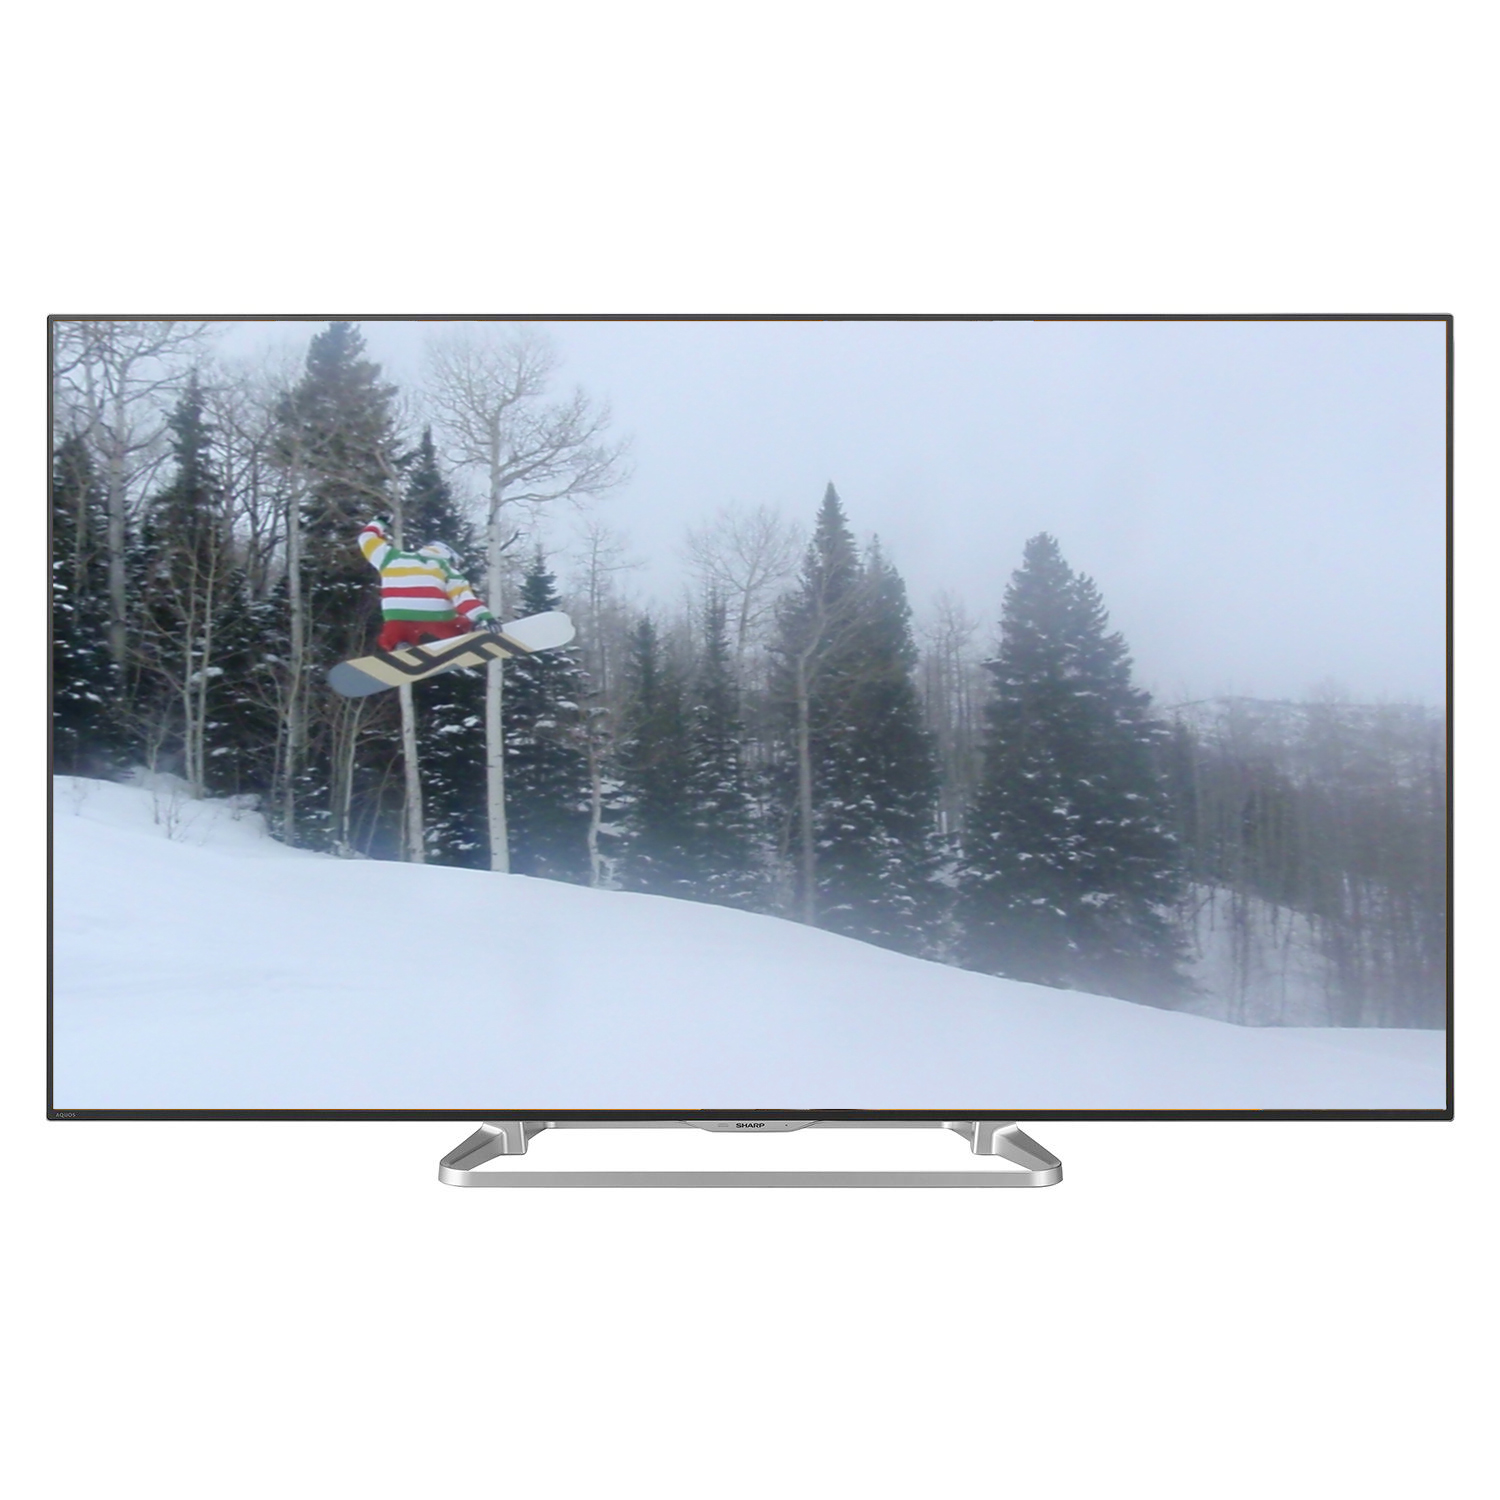 Sharp Sharp Reconditioned 70 In 1080P 240 Hz Smart LED TV W/ WIFI LC